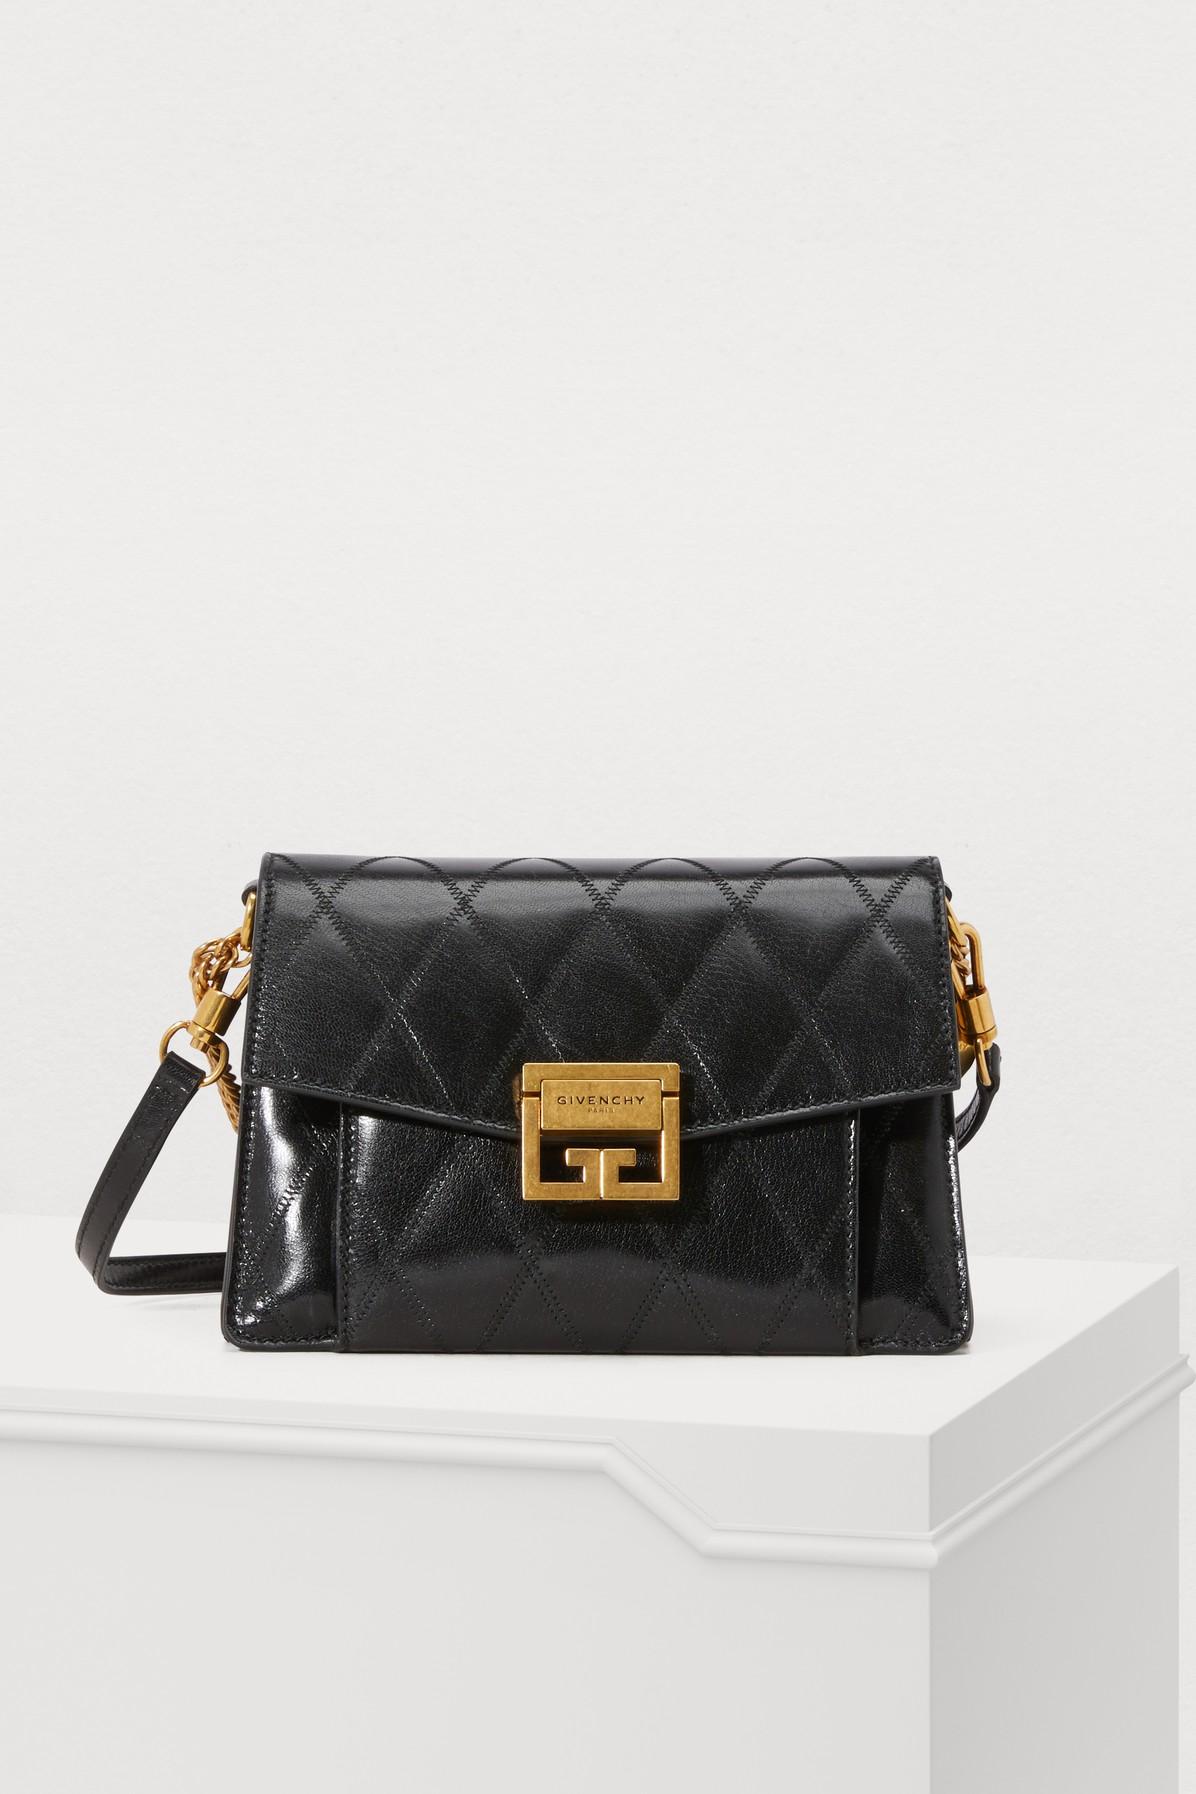 Givenchy Small Gv3 Bag In Diamond Quilted Leather in Black | Lyst